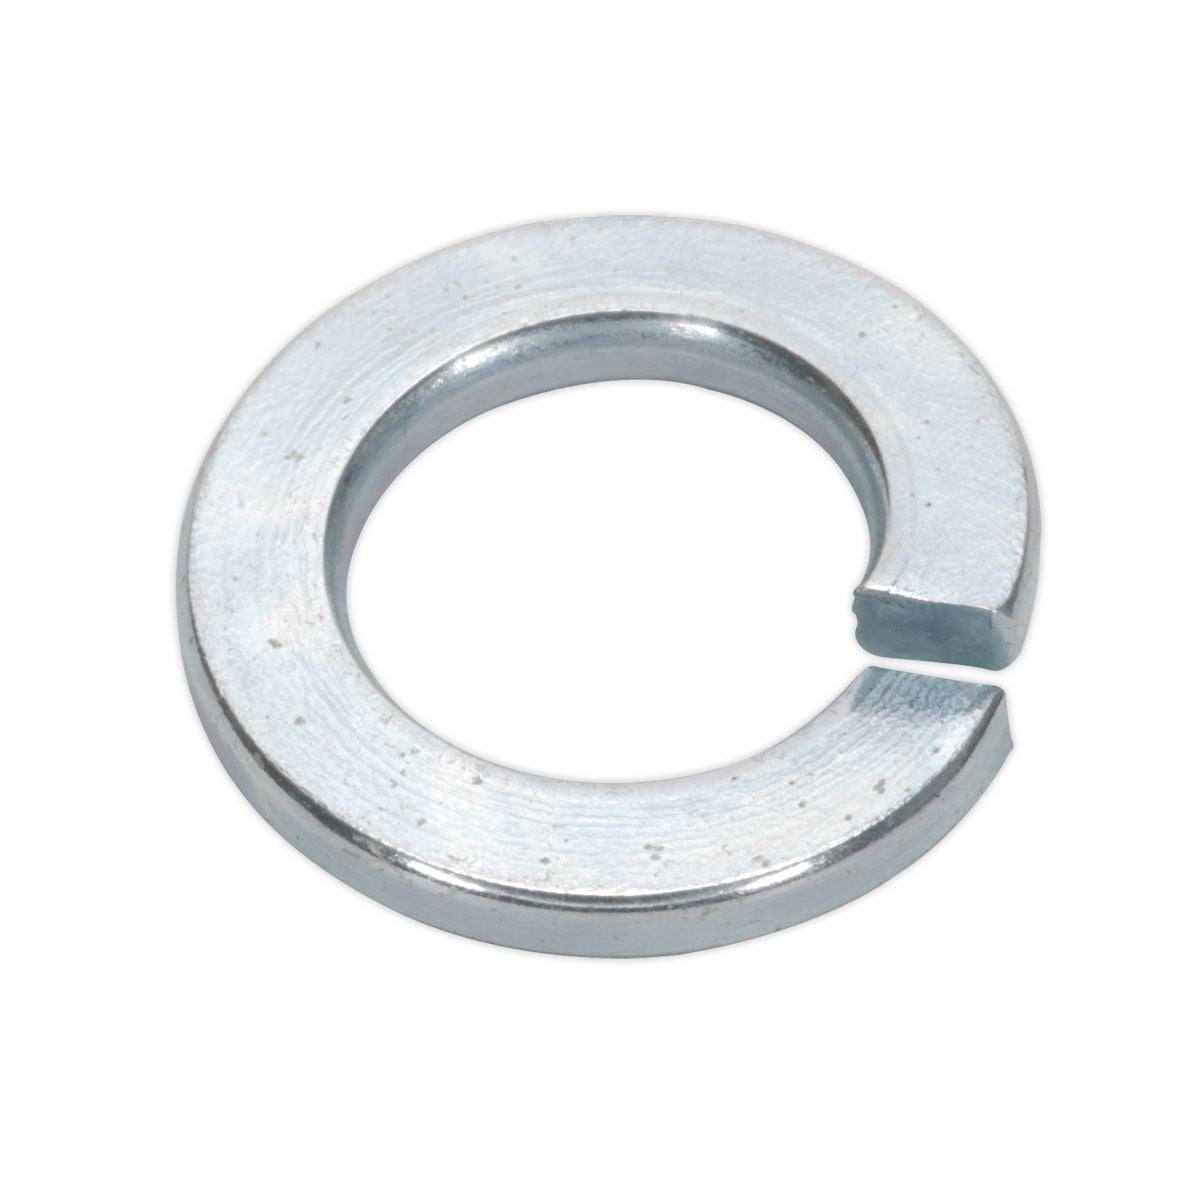 Sealey Spring Washer DIN 127B M12 Zinc Pack of 50